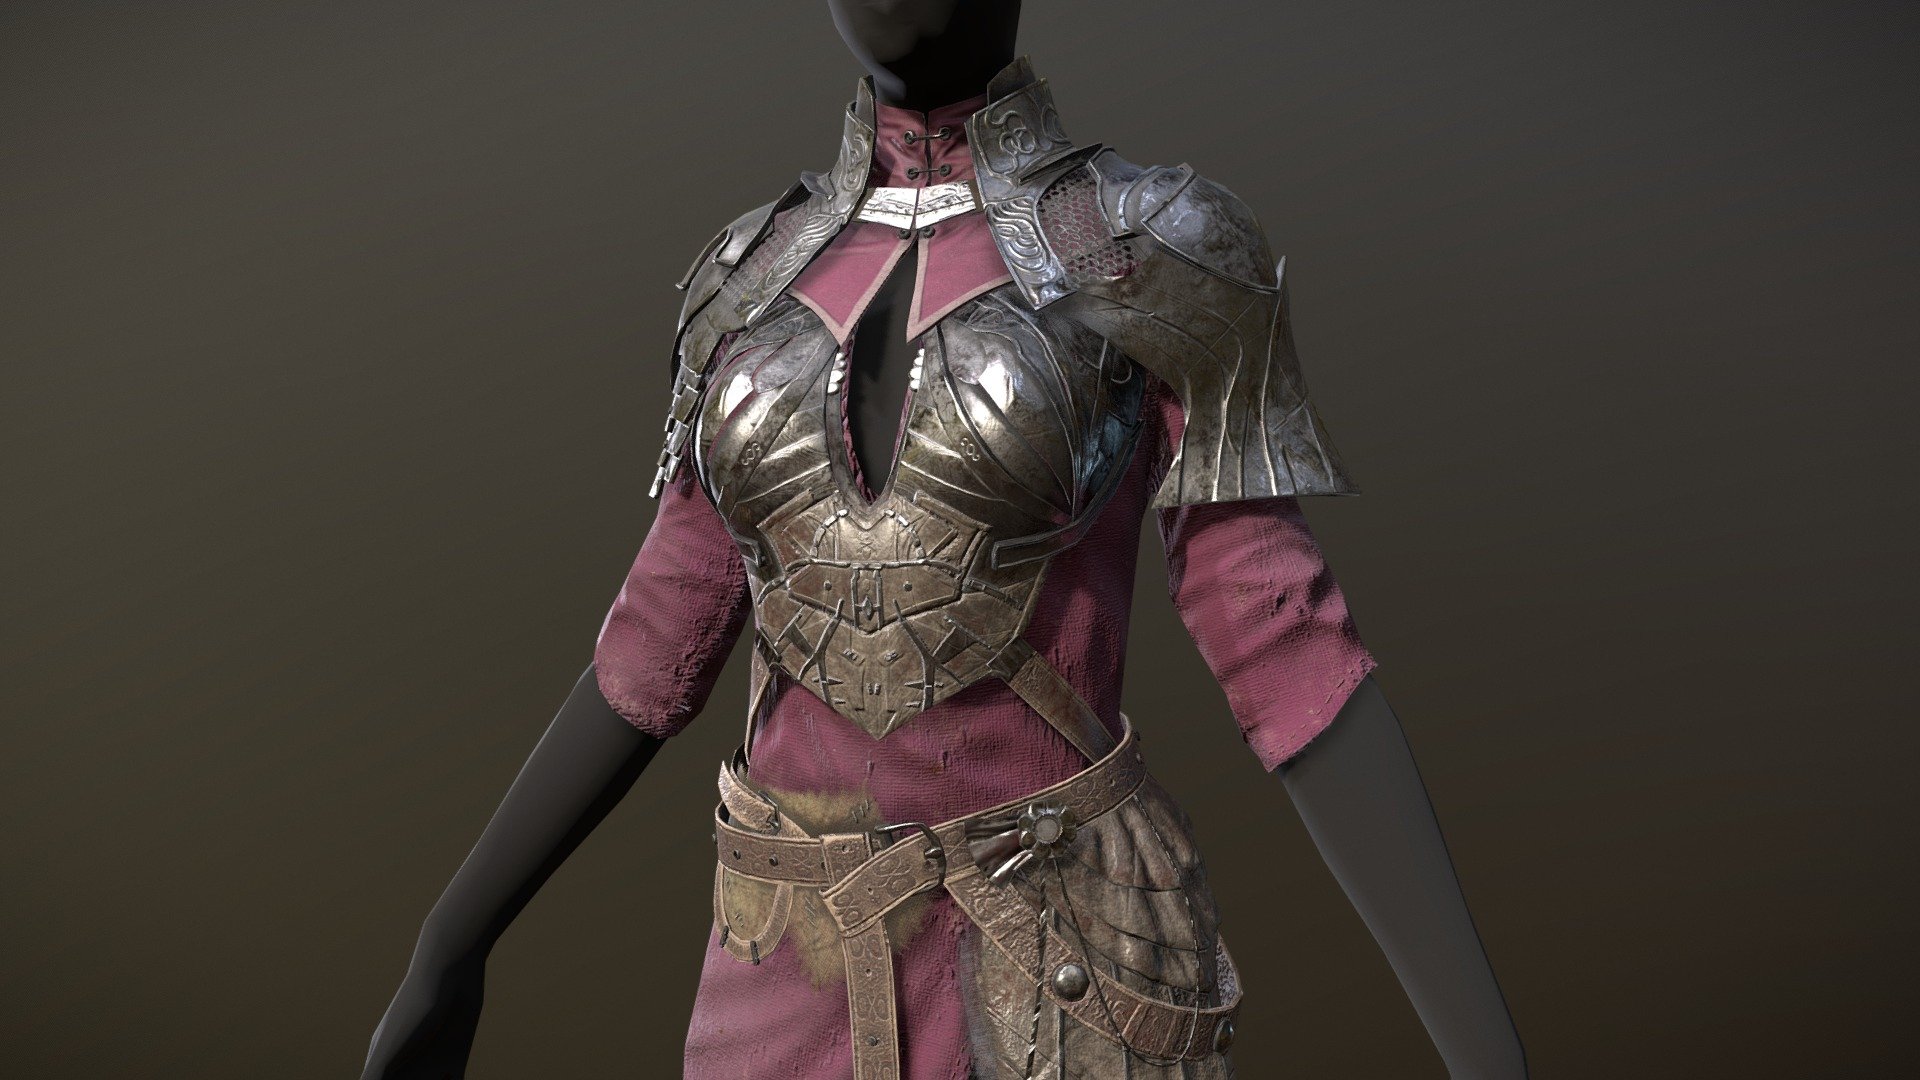 concept: https://www.artstation.com/artwork/rAn15E

Since I had never done armour before, I decided to translate a concept into 3D 3d model